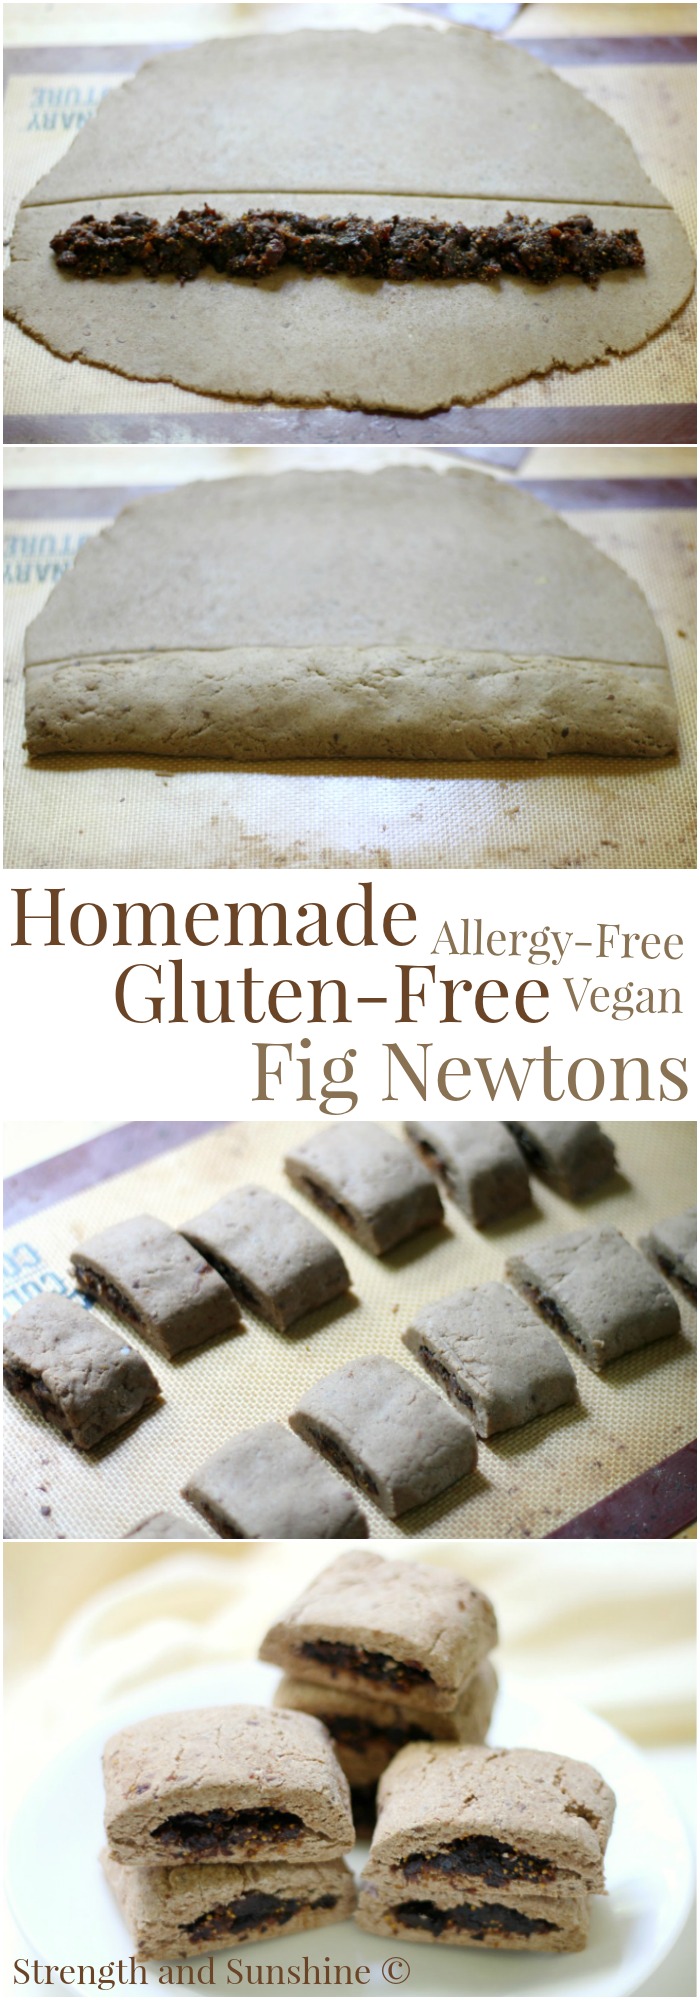 Homemade Gluten-Free Fig Newtons (Vegan, Allergy-Free) | Strength and Sunshine @RebeccaGF666 The classic cookie now baked right at home! Homemade Gluten-Free Fig Newtons, naturally sweet, vegan, and top-8 allergy-free. A healthy dessert or snack, these fig filled soft cookie rolls will be a new staple recipe in your home!